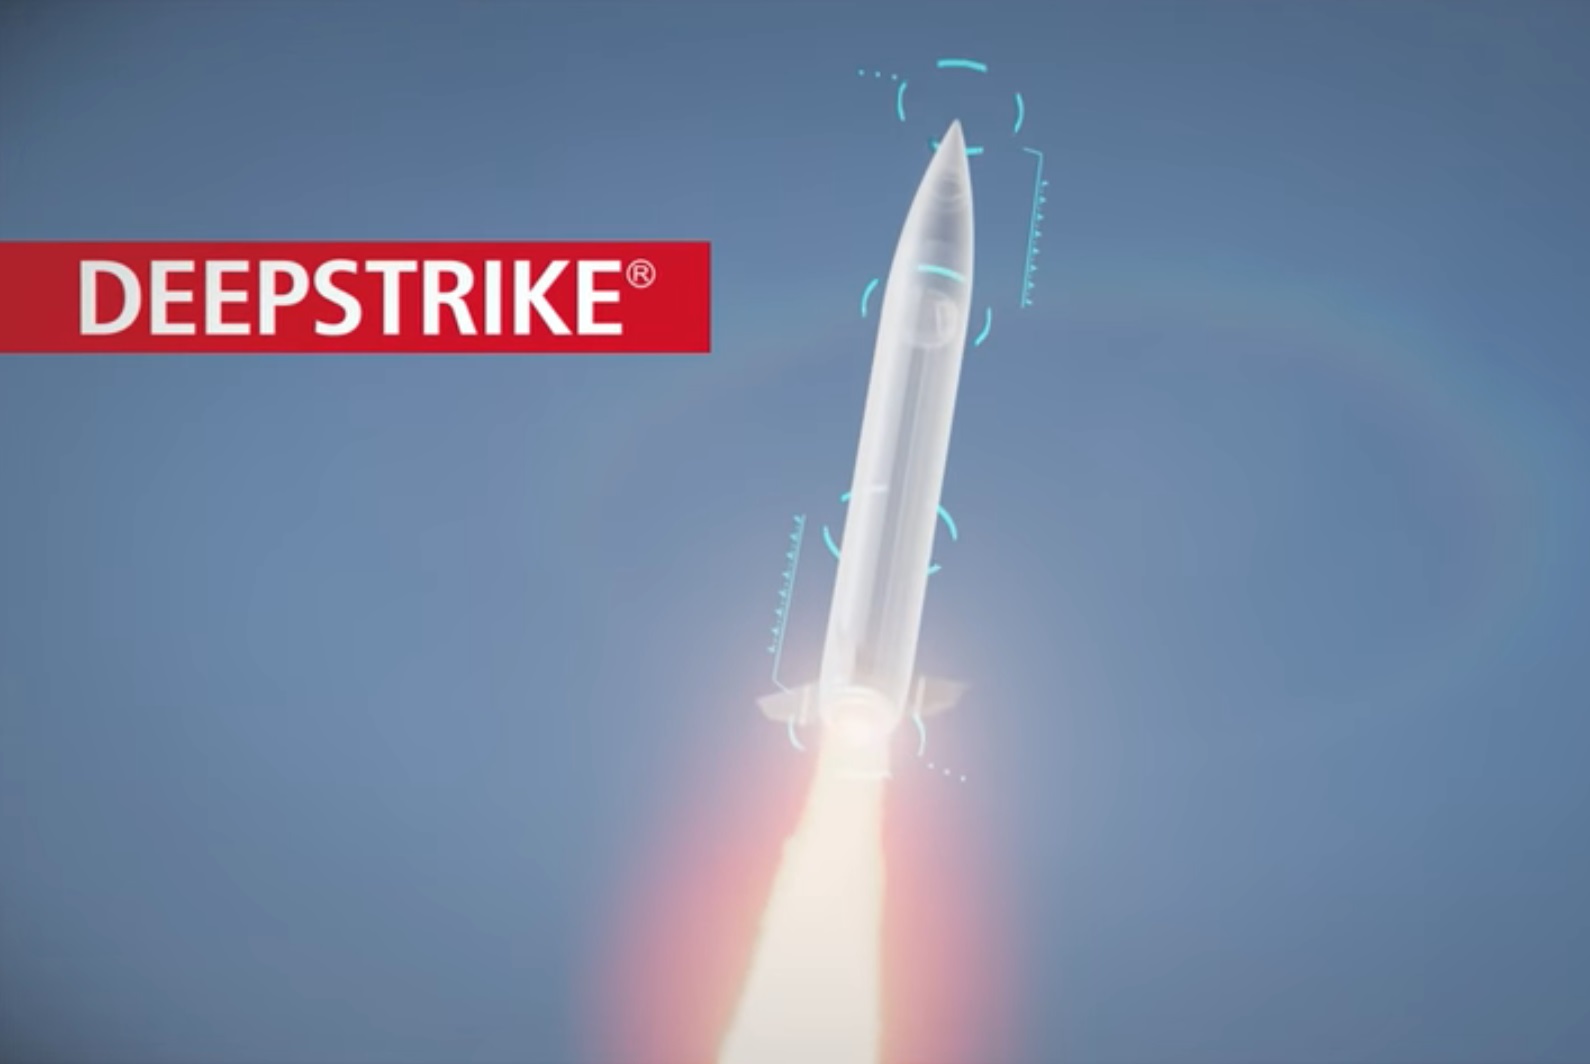 Raytheon releases video of DeepStrike missile